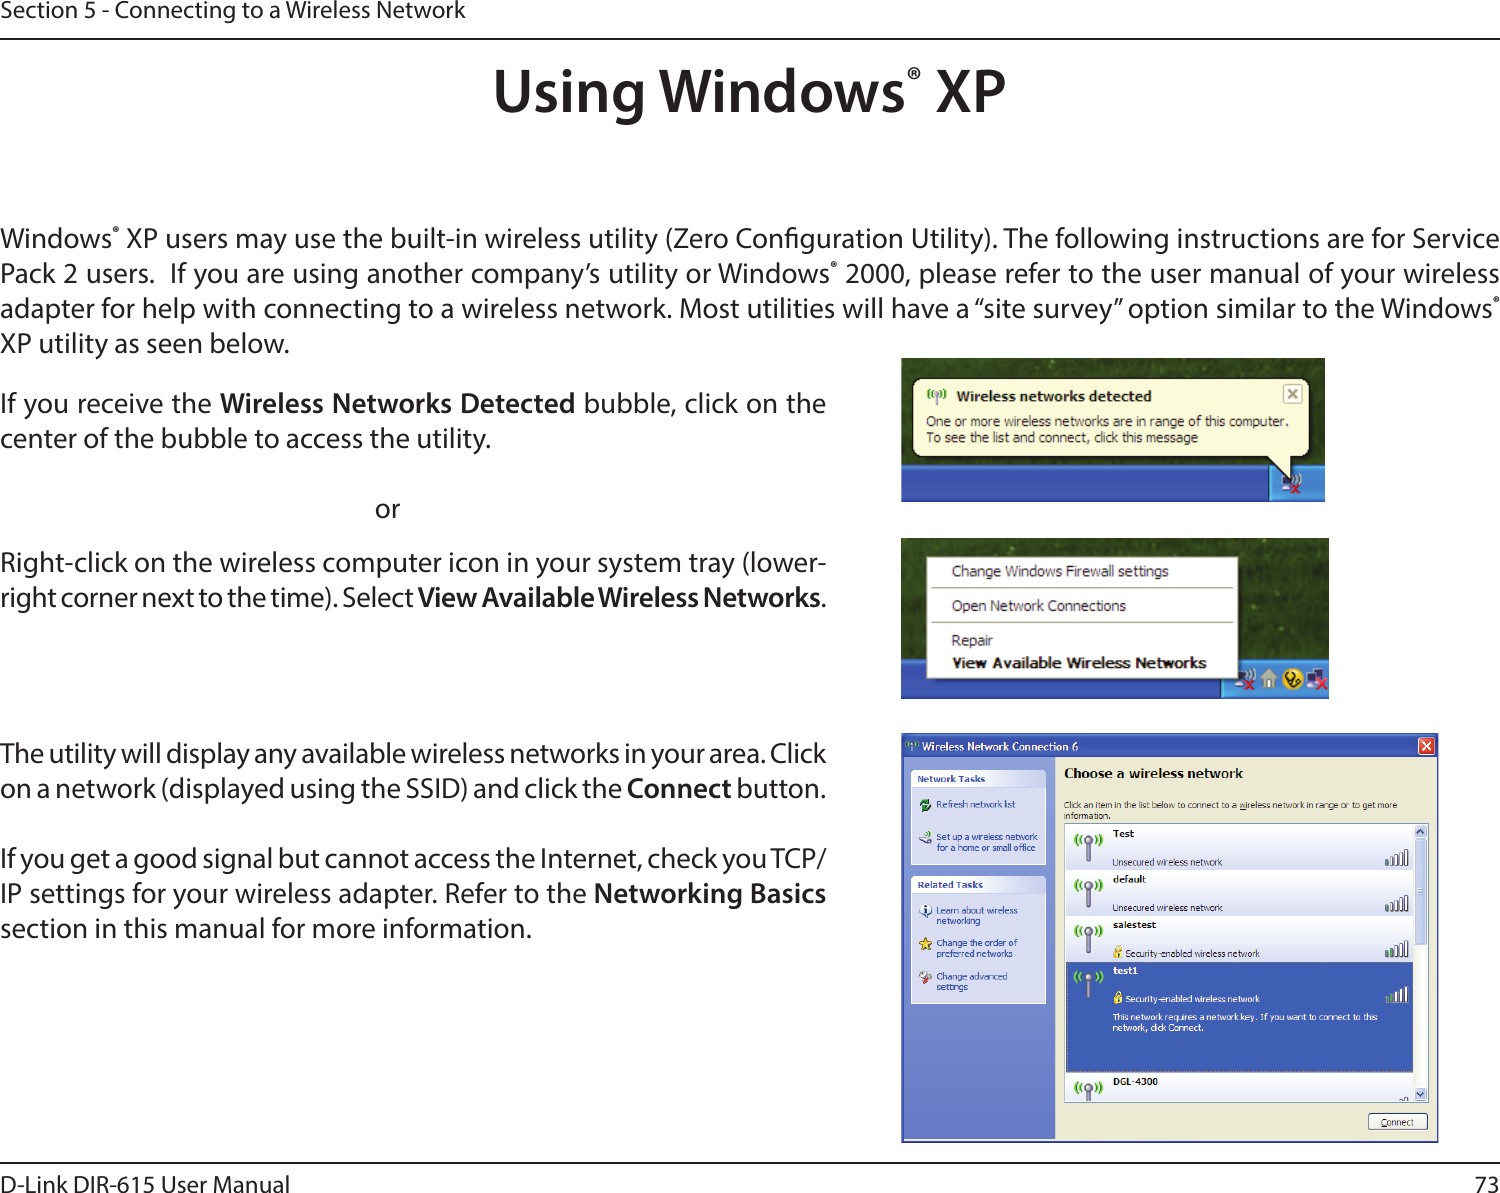 73D-Link DIR-615 User ManualSection 5 - Connecting to a Wireless NetworkUsing Windows® XPWindows® XP users may use the built-in wireless utility (Zero Conguration Utility). The following instructions are for Service Pack 2 users.  If you are using another company’s utility or Windows® 2000, please refer to the user manual of your wireless adapter for help with connecting to a wireless network. Most utilities will have a “site survey” option similar to the Windows® XP utility as seen below.Right-click on the wireless computer icon in your system tray (lower-right corner next to the time). Select View Available Wireless Networks.If you receive the Wireless Networks Detected bubble, click on the center of the bubble to access the utility.     orThe utility will display any available wireless networks in your area. Click on a network (displayed using the SSID) and click the Connect button.If you get a good signal but cannot access the Internet, check you TCP/IP settings for your wireless adapter. Refer to the Networking Basics section in this manual for more information.